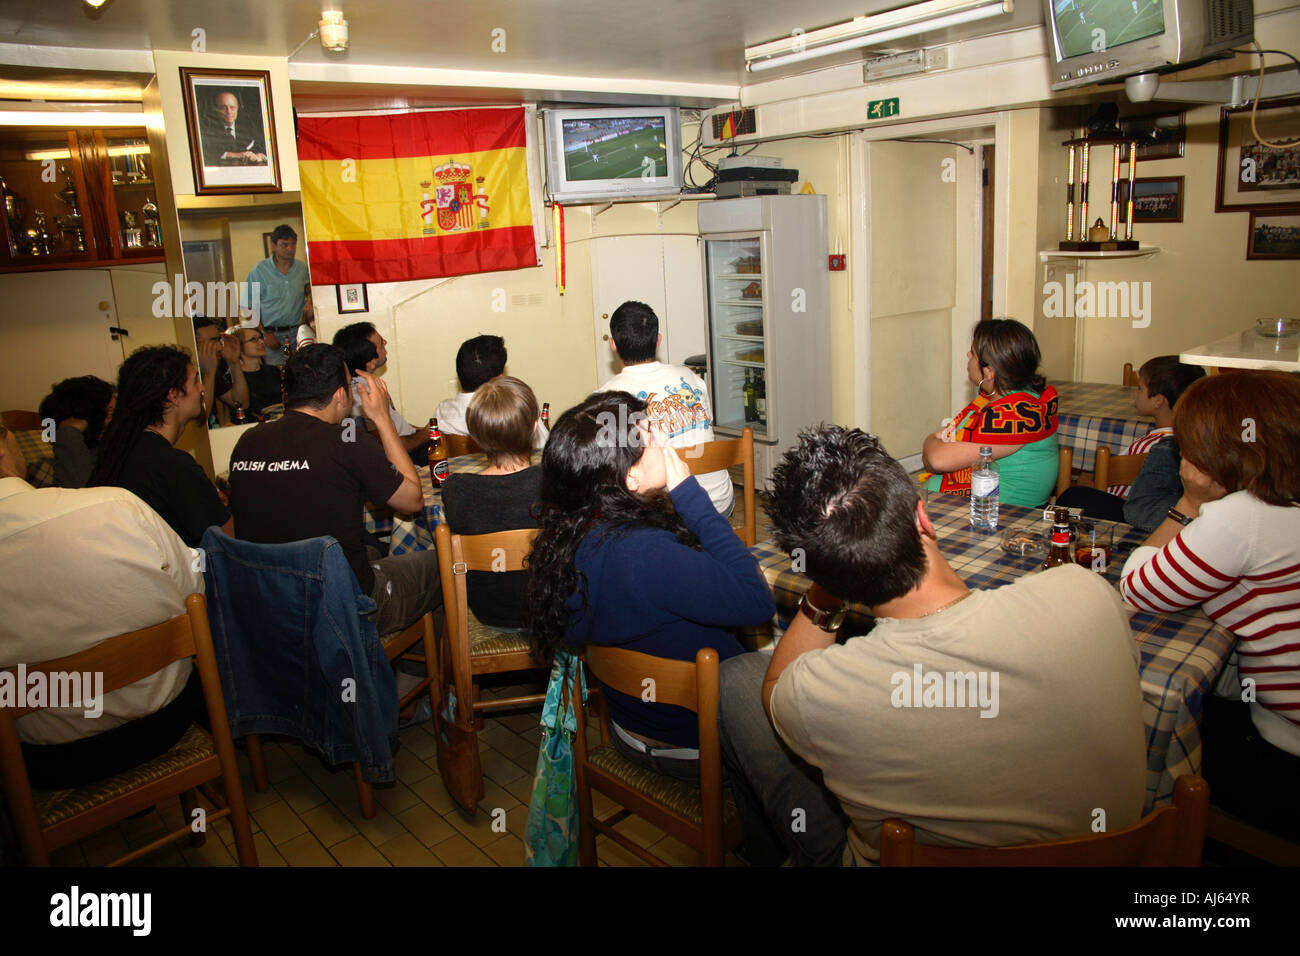 Spanish supporters in a galician restaurant, London, Spain vs France, 2006 World Cup Finals Stock Photo